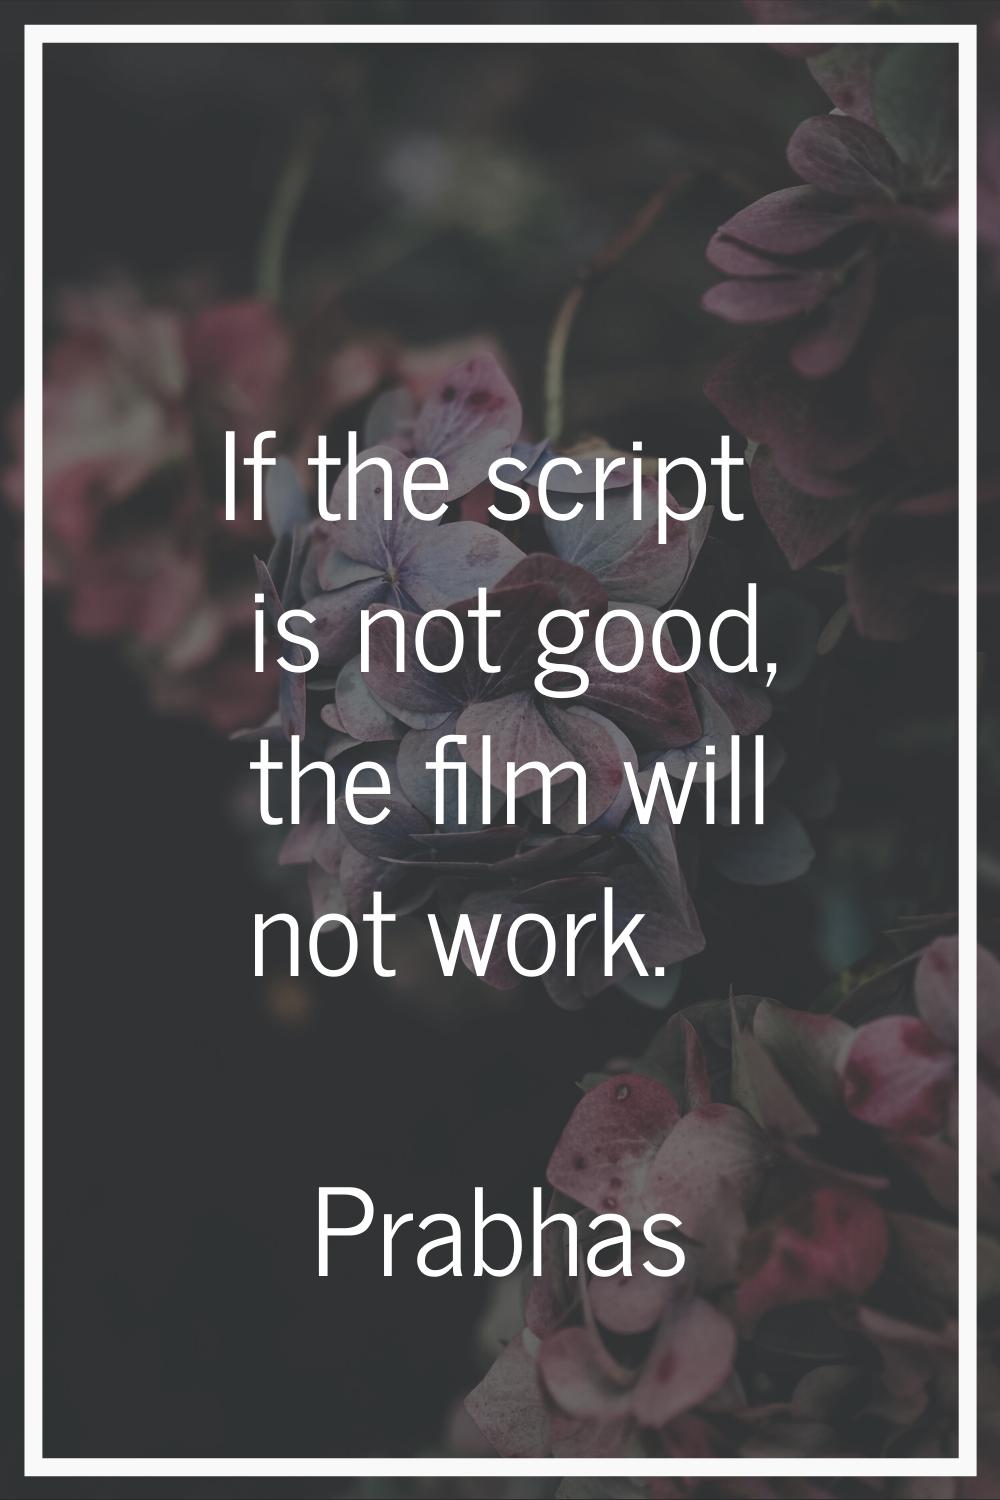 If the script is not good, the film will not work.